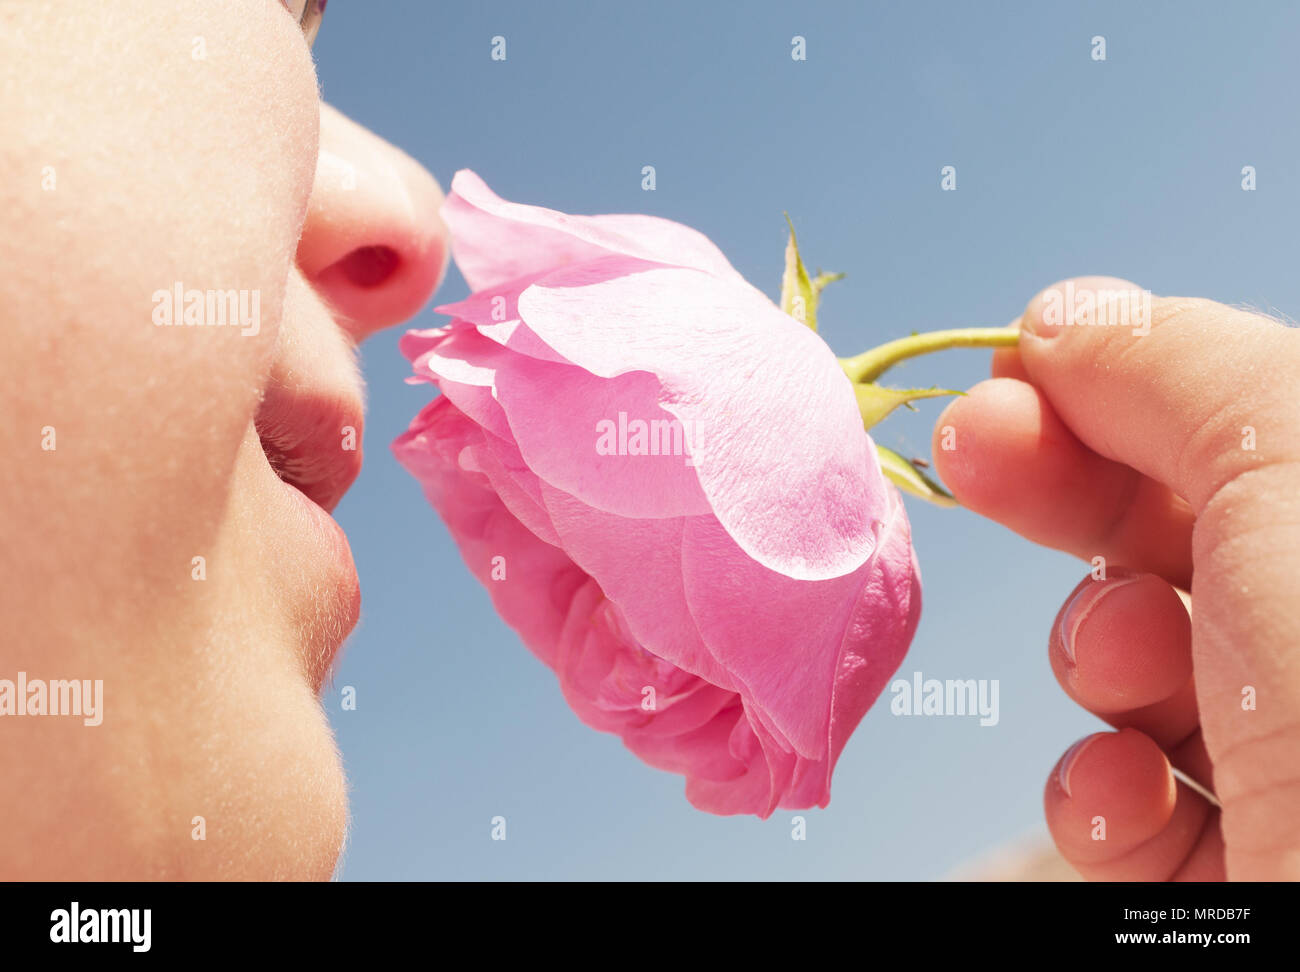 seven years old boy smelling pink rose  in spring day blue sky background Stock Photo